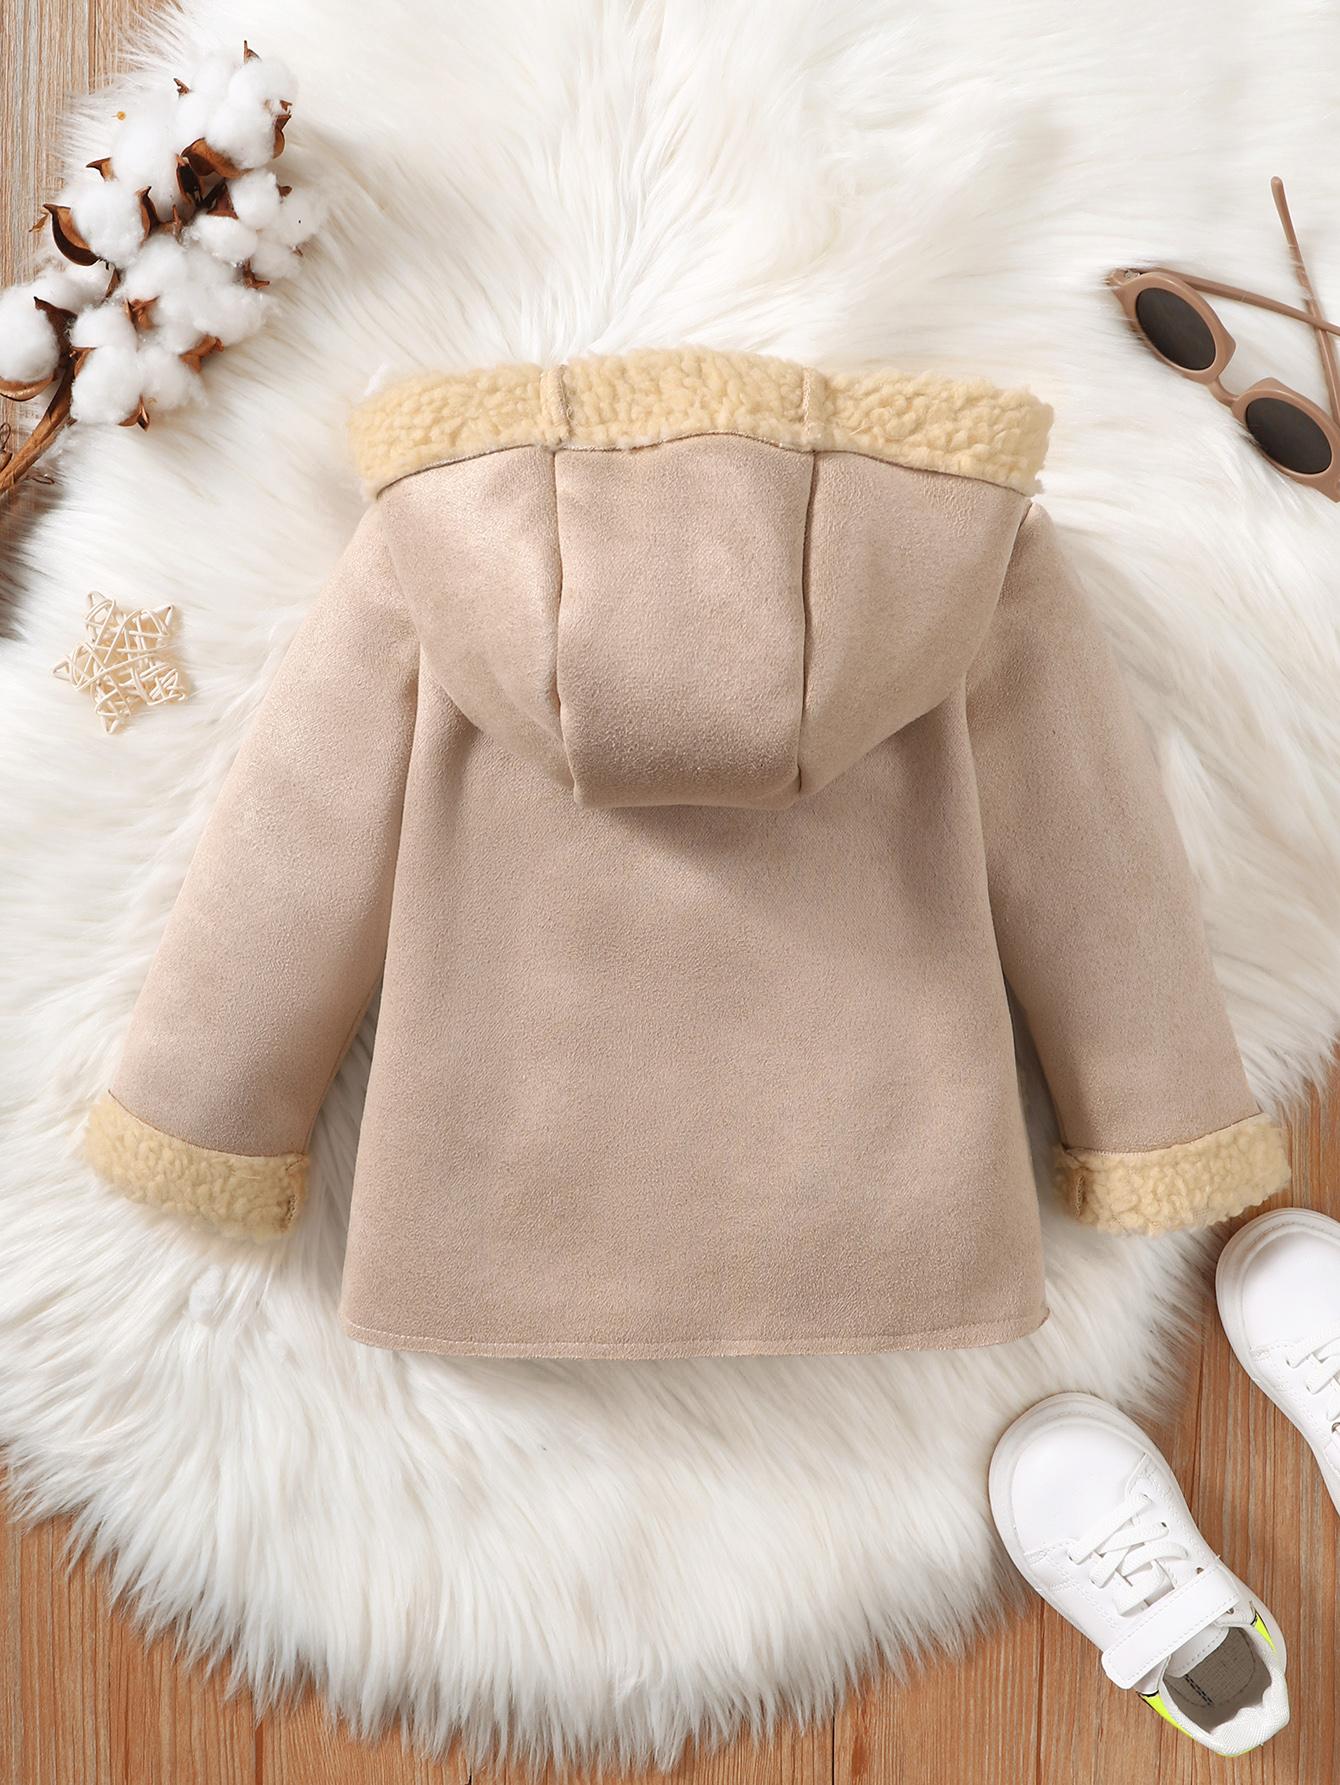 6M-3Y Baby Clothes Baby Coat Long Sleeve Pocket Hoodie One Piece Apricot Catpapa 112208019